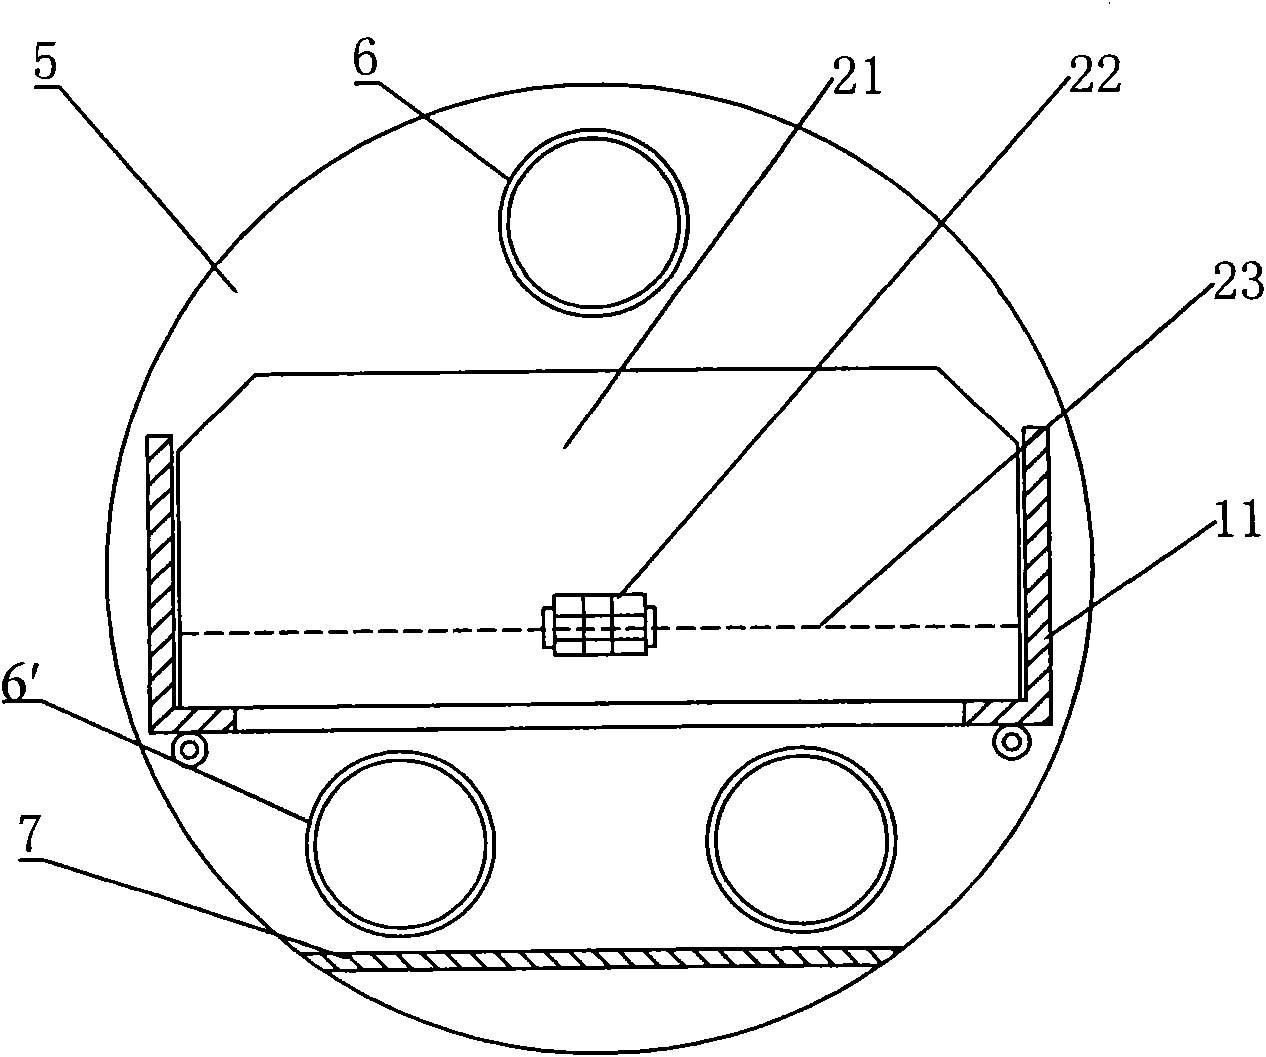 Superconductive magnetic separating device